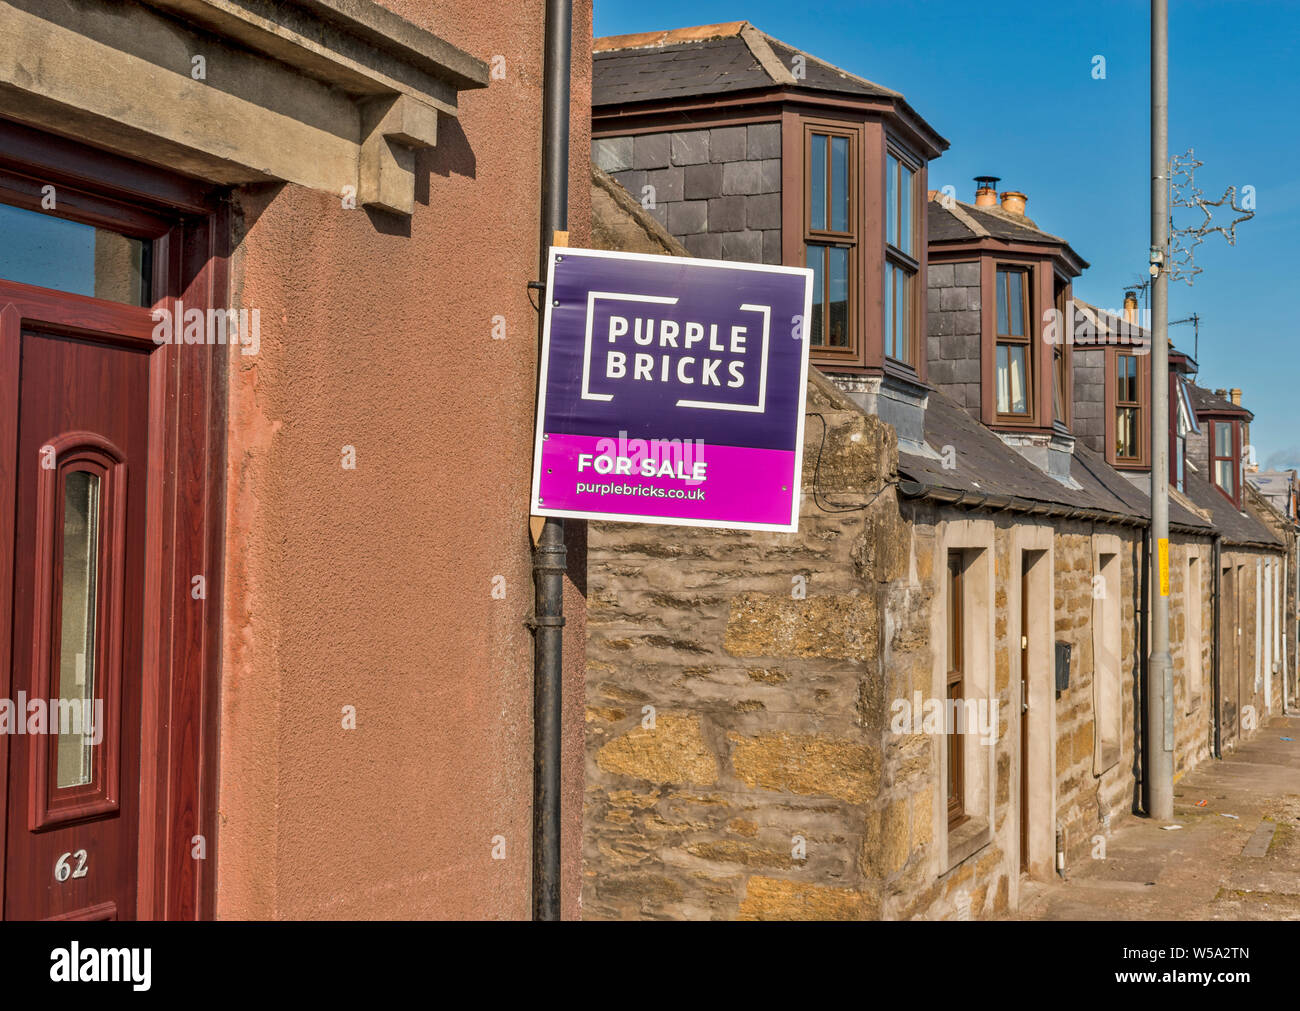 PURPLE BRICKS FOR SALE SIGN A STREET WITH HOUSES AND THE SIGN ON THE WALL OF A HOUSE Stock Photo